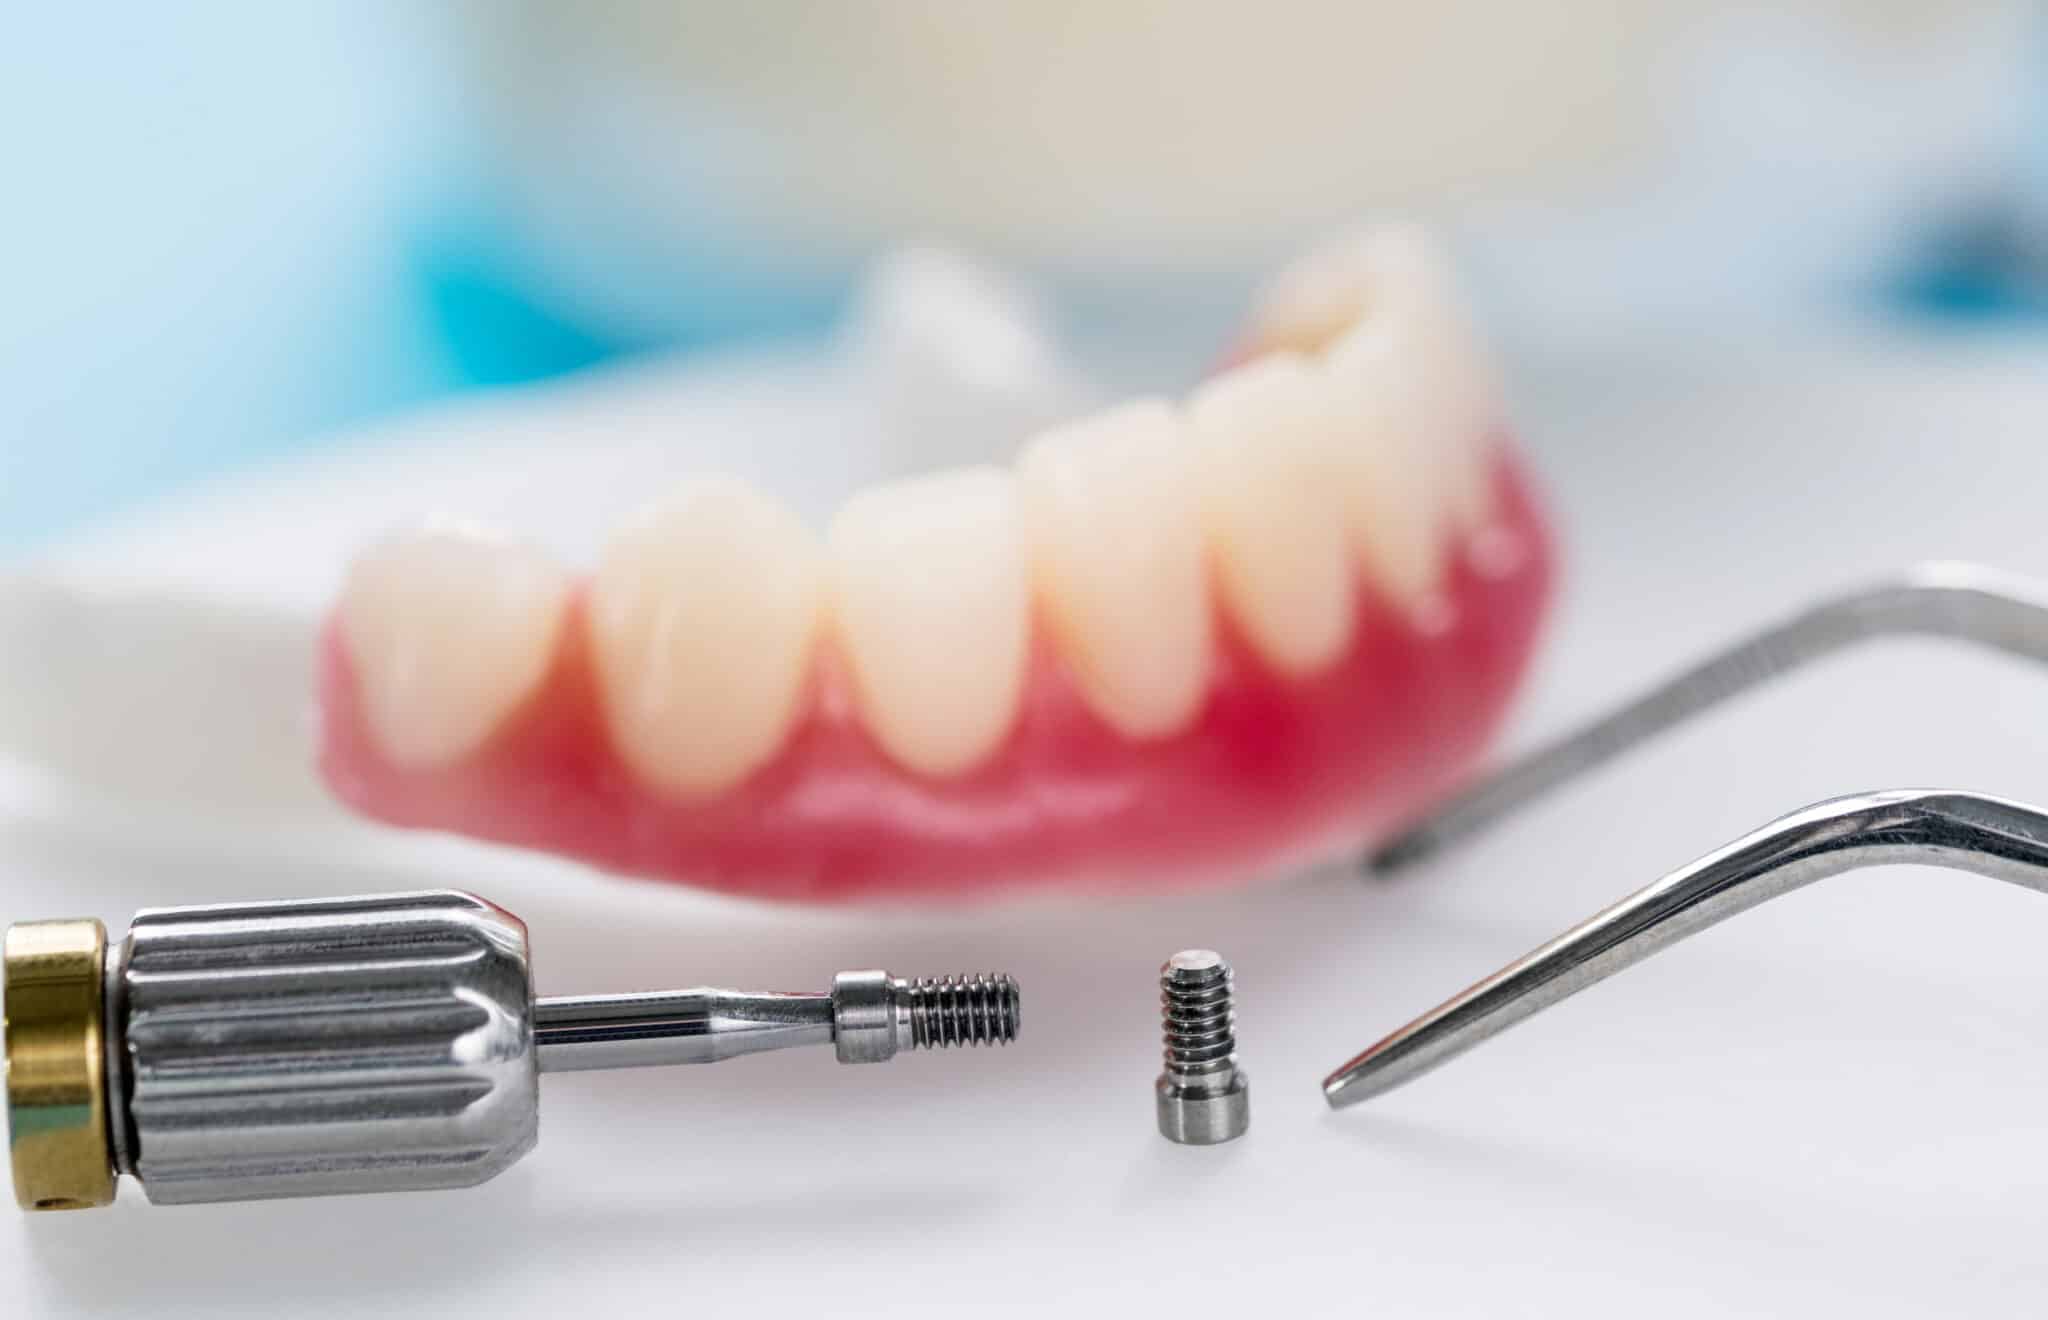 Getting to the root of the problem with dental implants